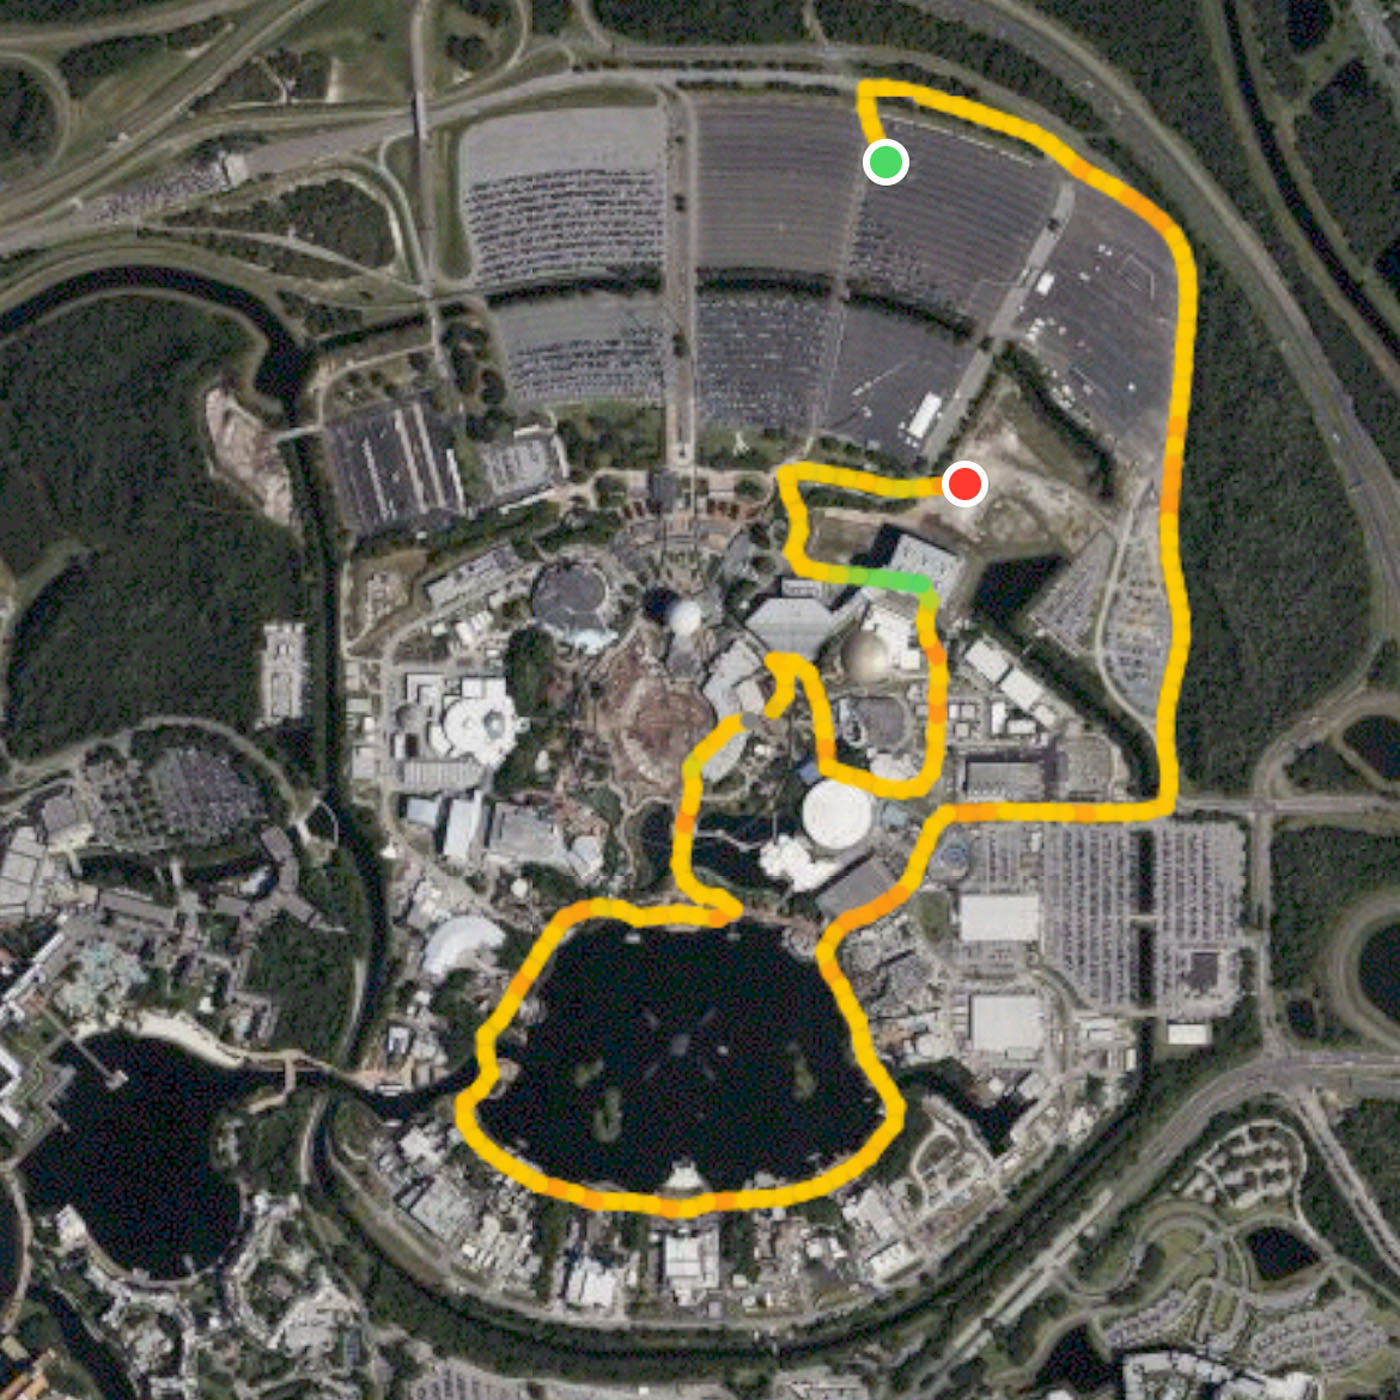 Disney Wine and Dine 5K Route